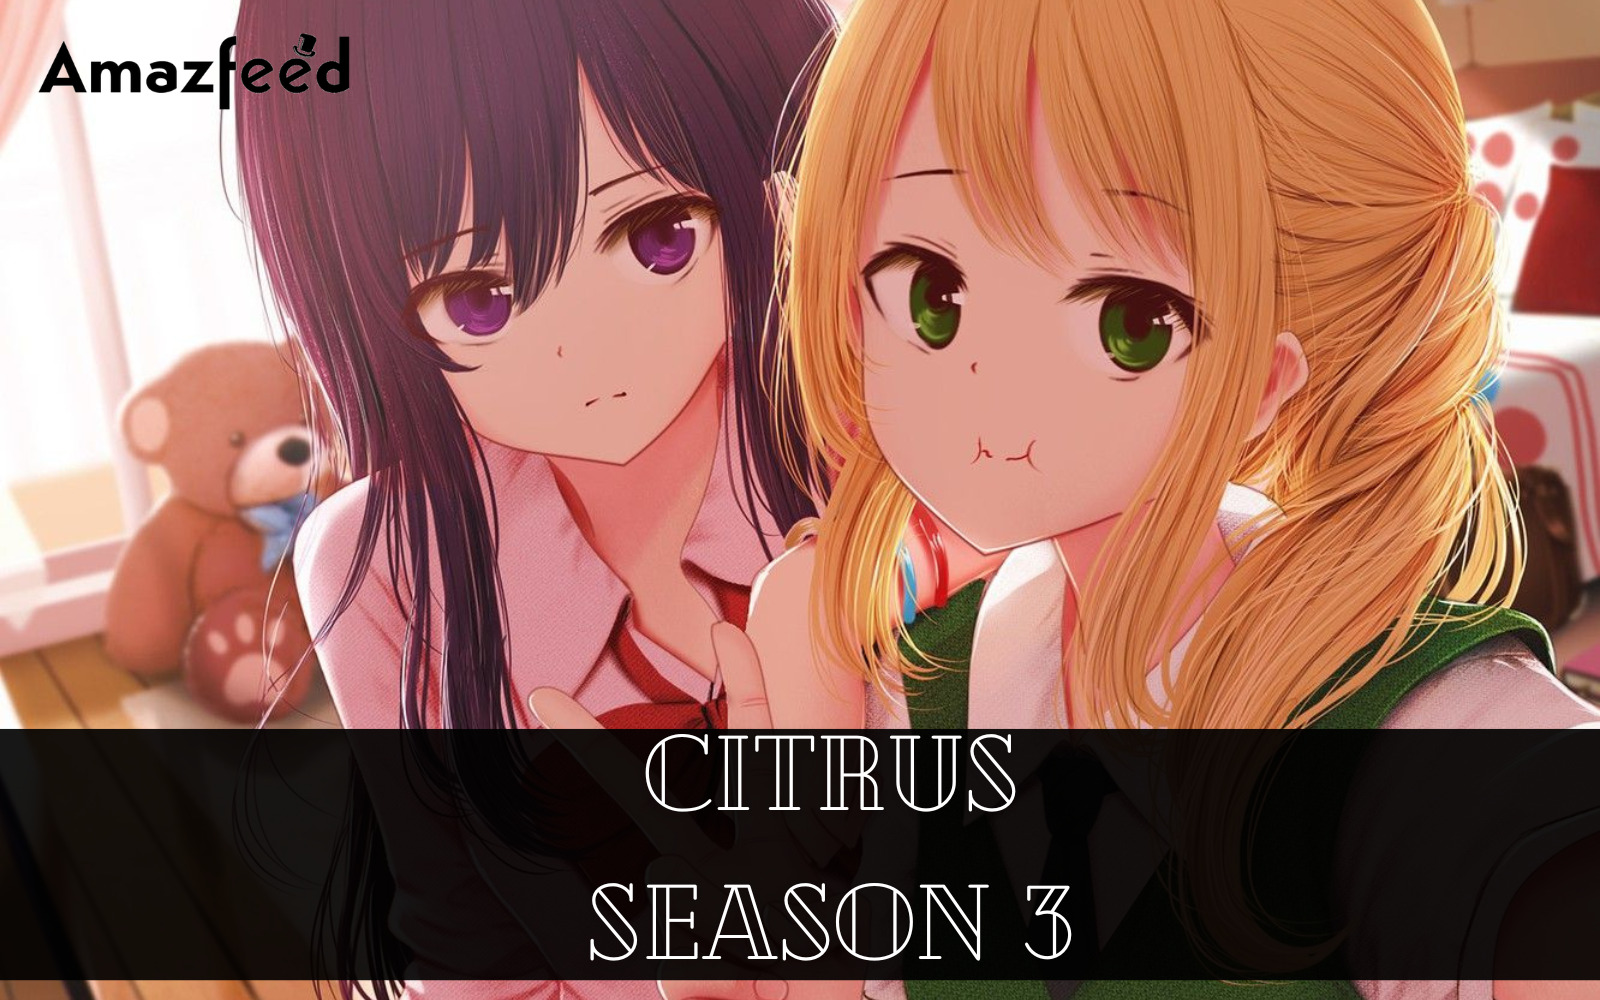 Who Will Be Part Of Citrus Season 3 (Voiced Cast)